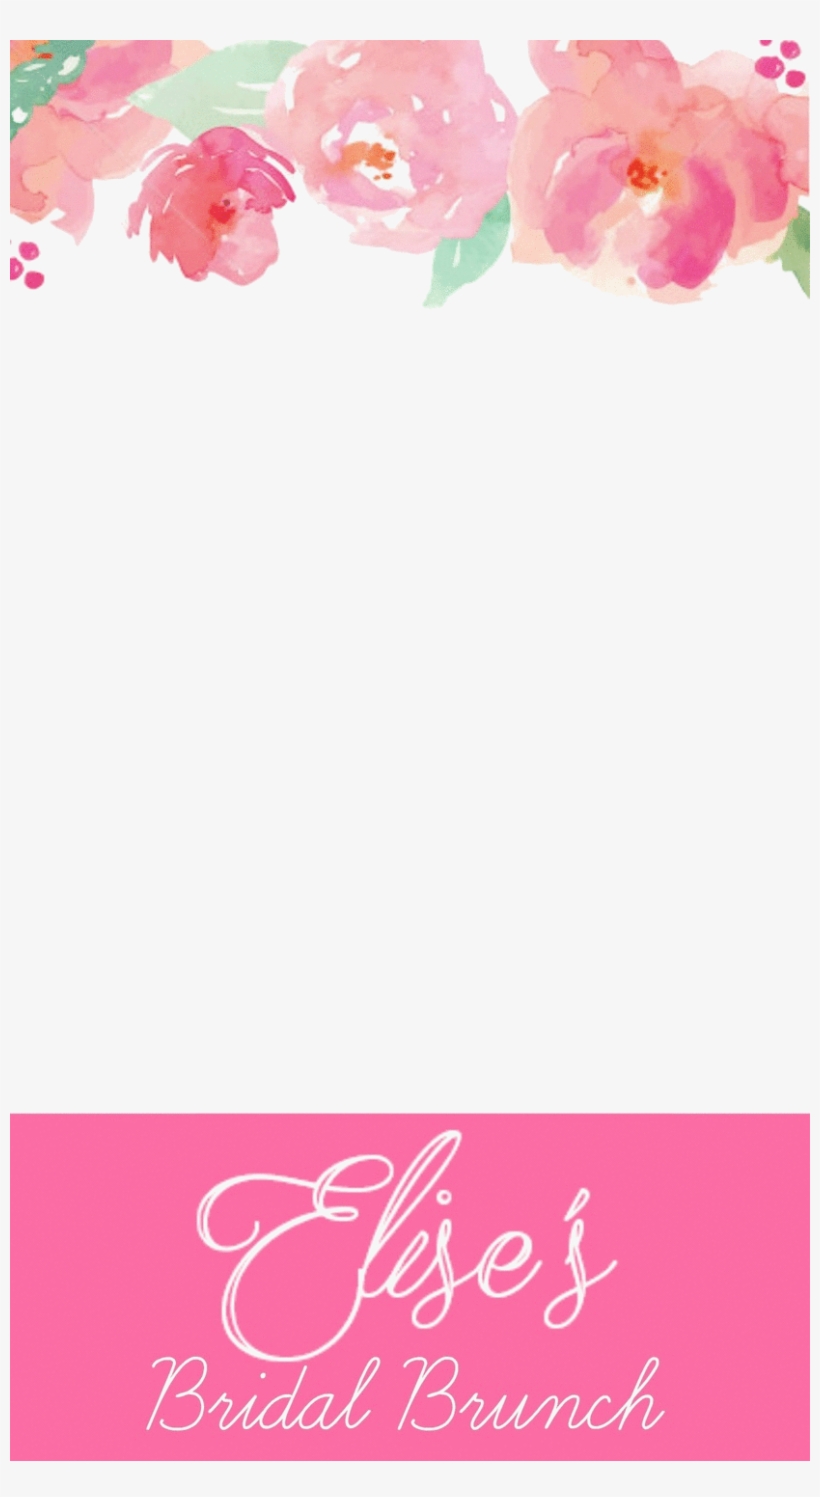 Bridal Brunch Snapchat Geofilter - Free Watercolor Floral Borders, transparent png #9674